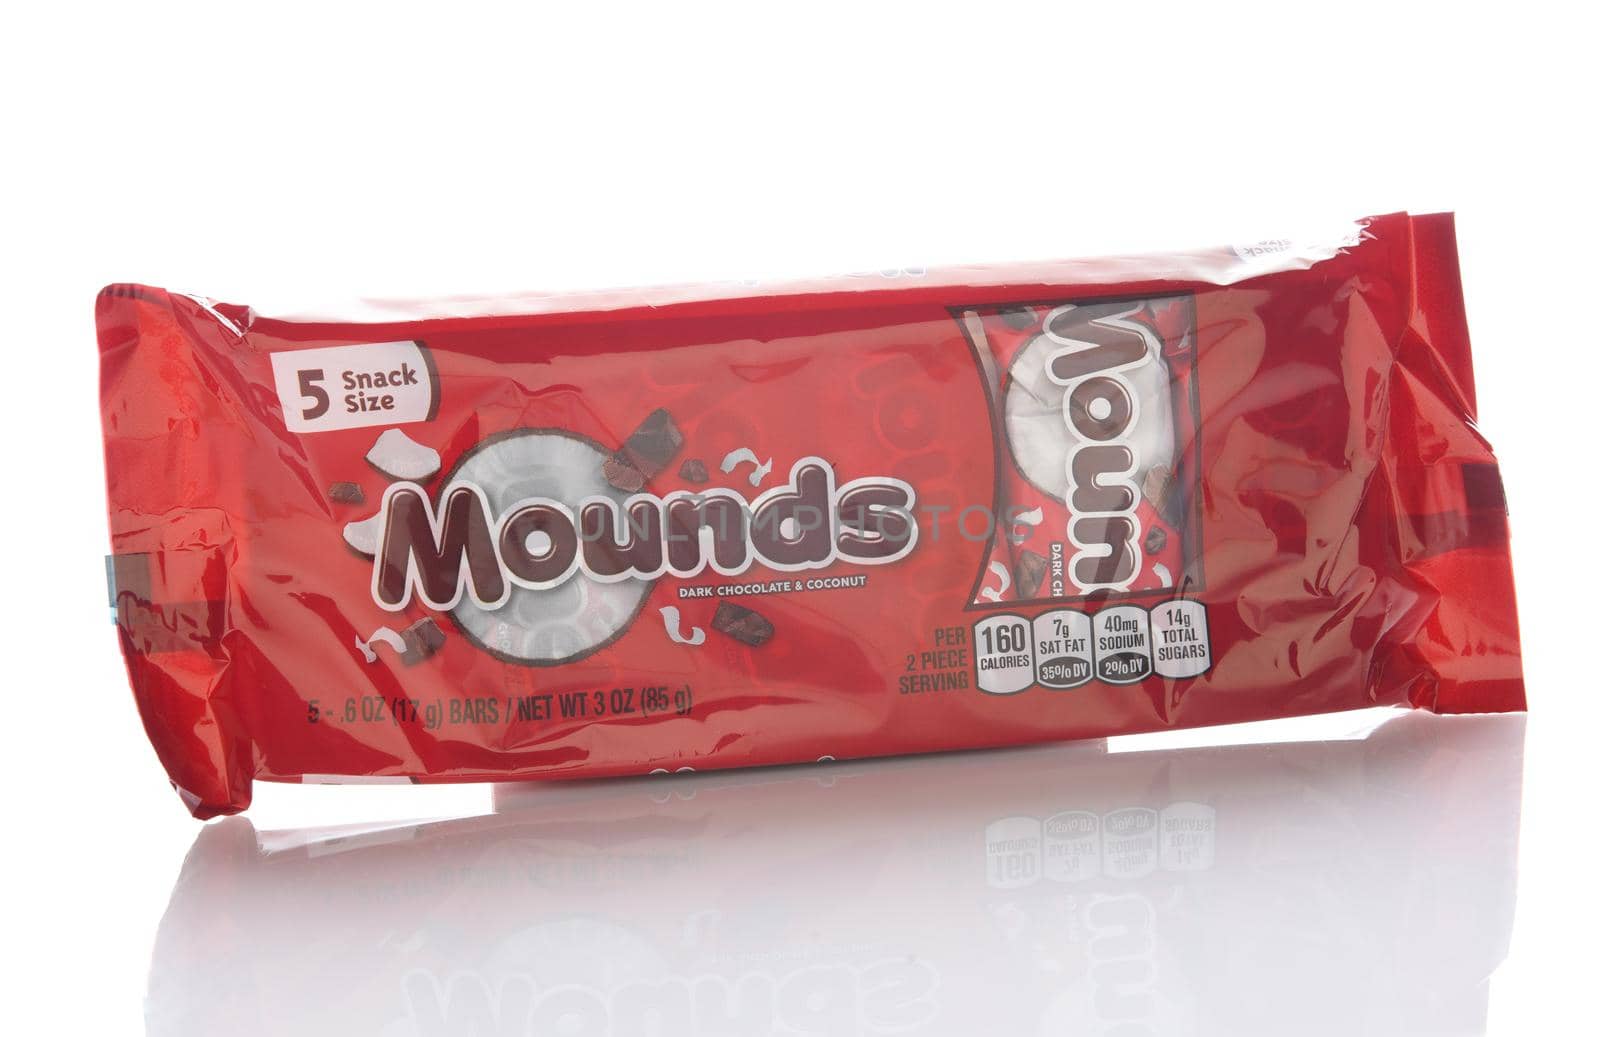 IRVINE, CALIFORNIA - 9 OCT 2019: A package of 5 Snack Size Mounds Candy Bars.